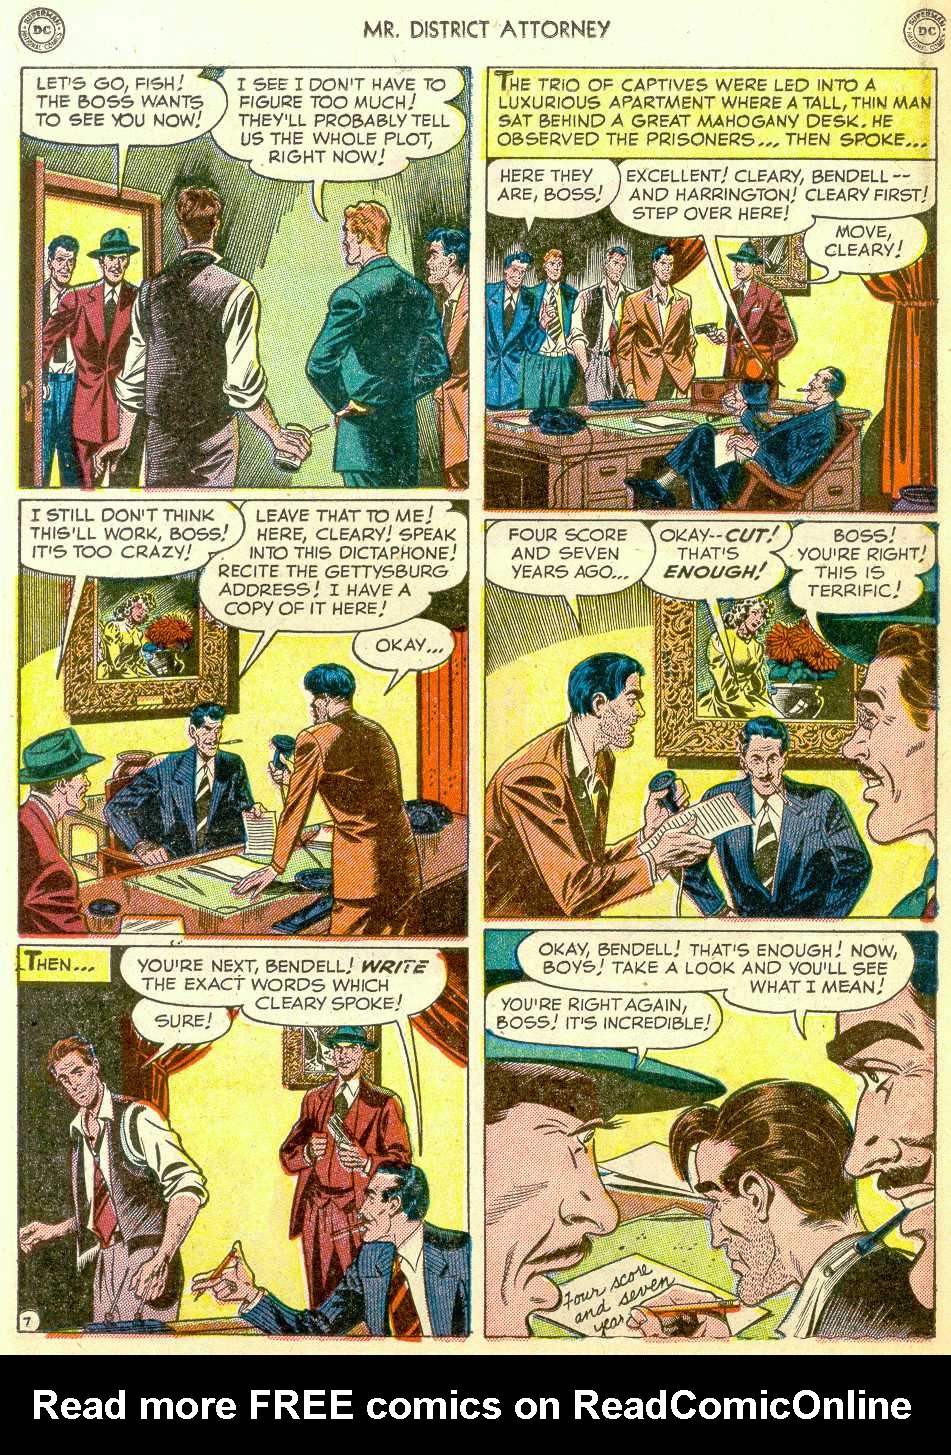 Read online Mr. District Attorney comic -  Issue #20 - 21